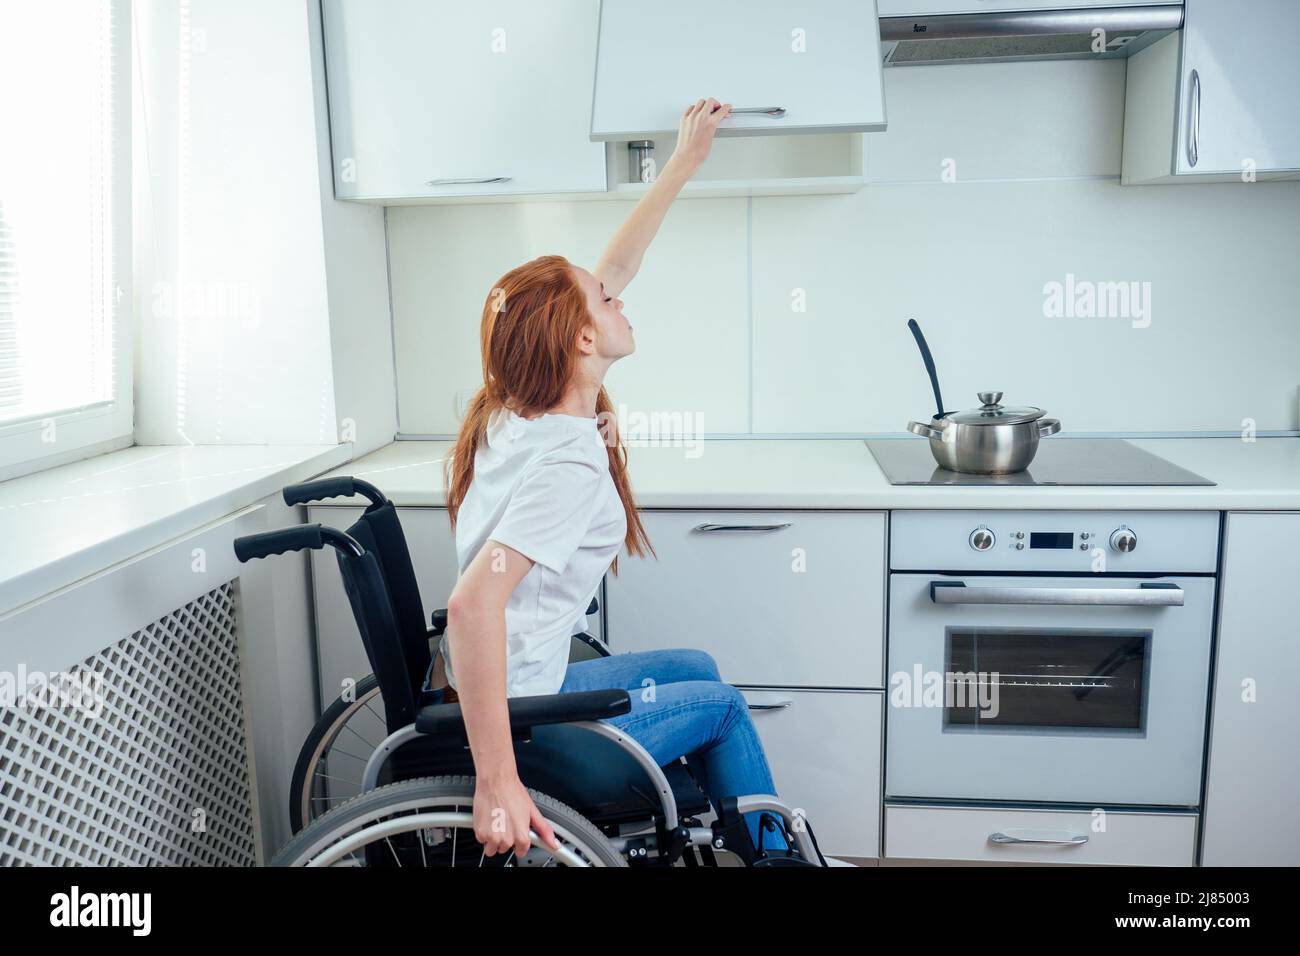 https://c8.alamy.com/comp/2J85003/disabled-redhaired-ginger-woman-in-wheelchair-preparing-meal-in-kitchentry-to-reaching-the-top-shelf-2J85003.jpg